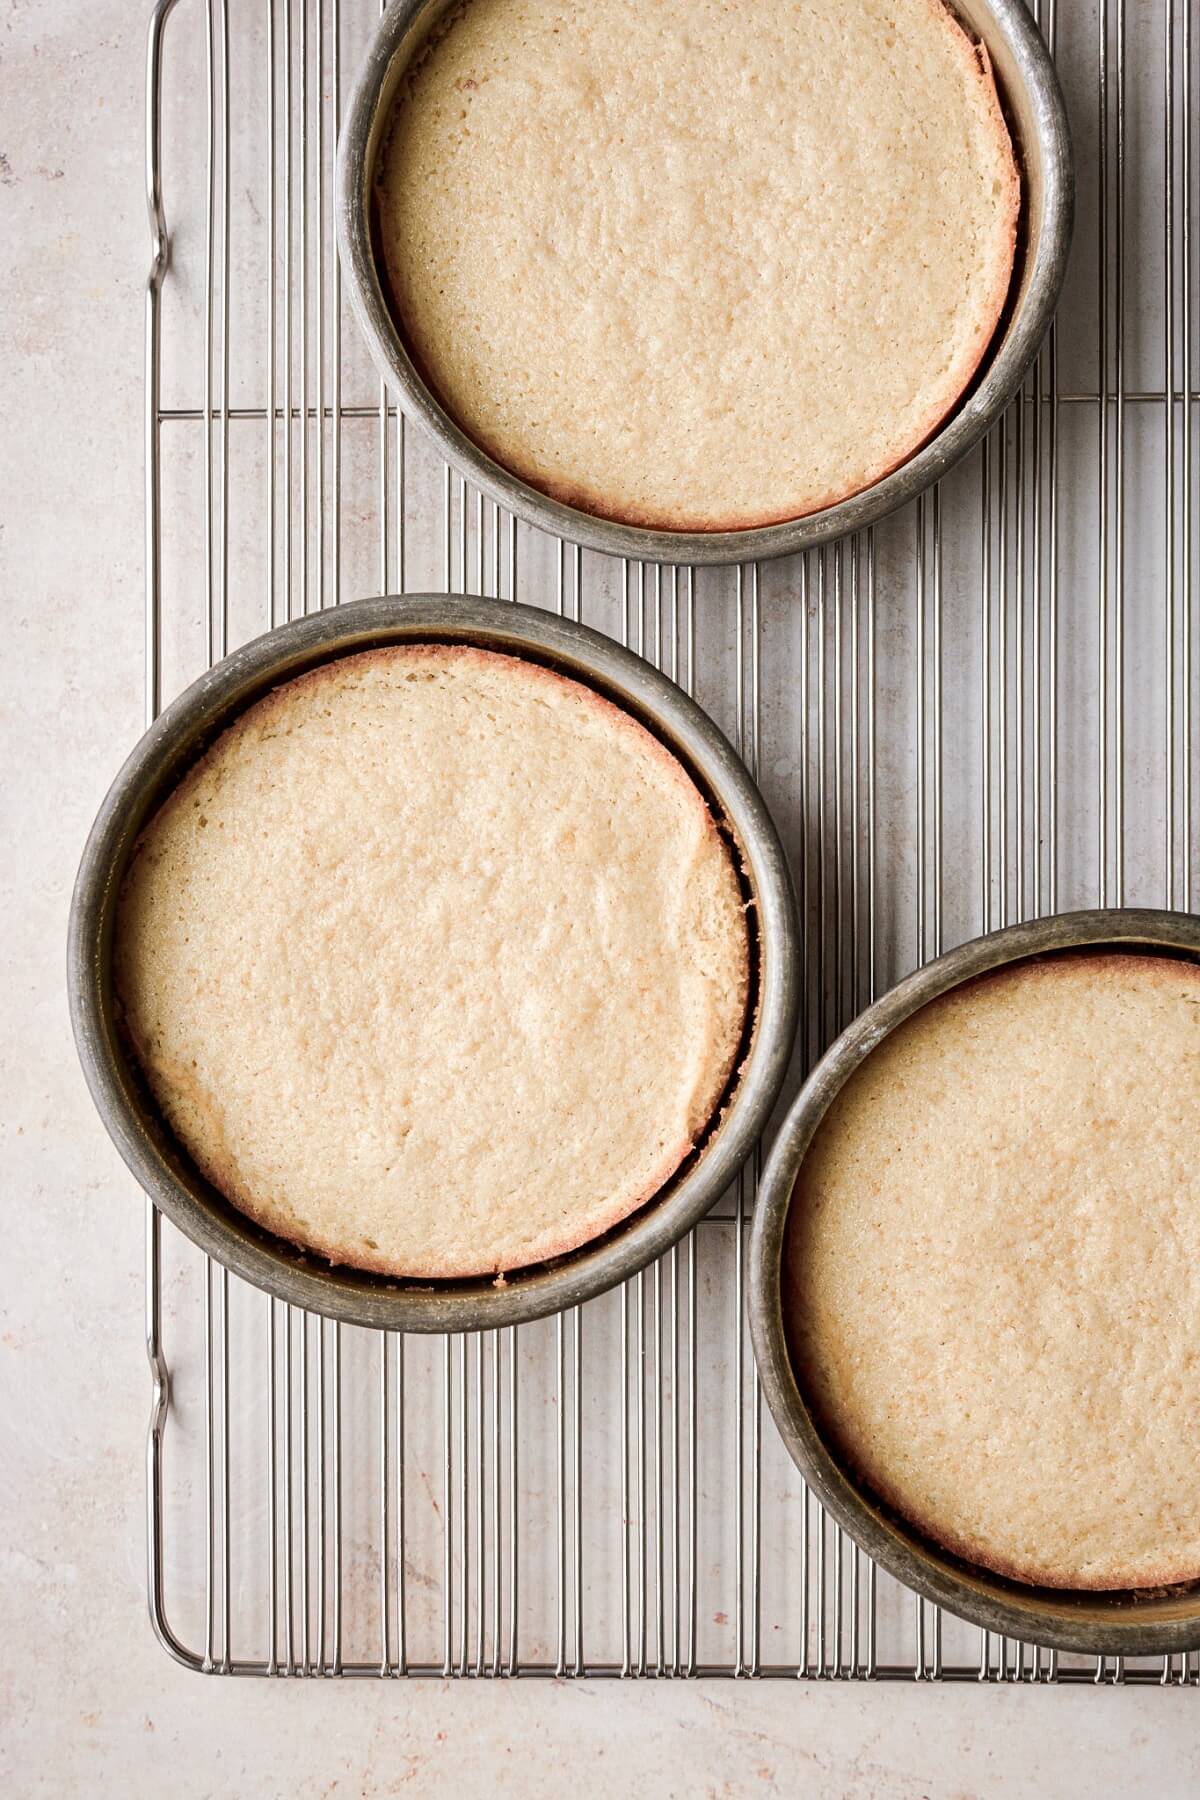 Almond cakes cooling in cake pans.